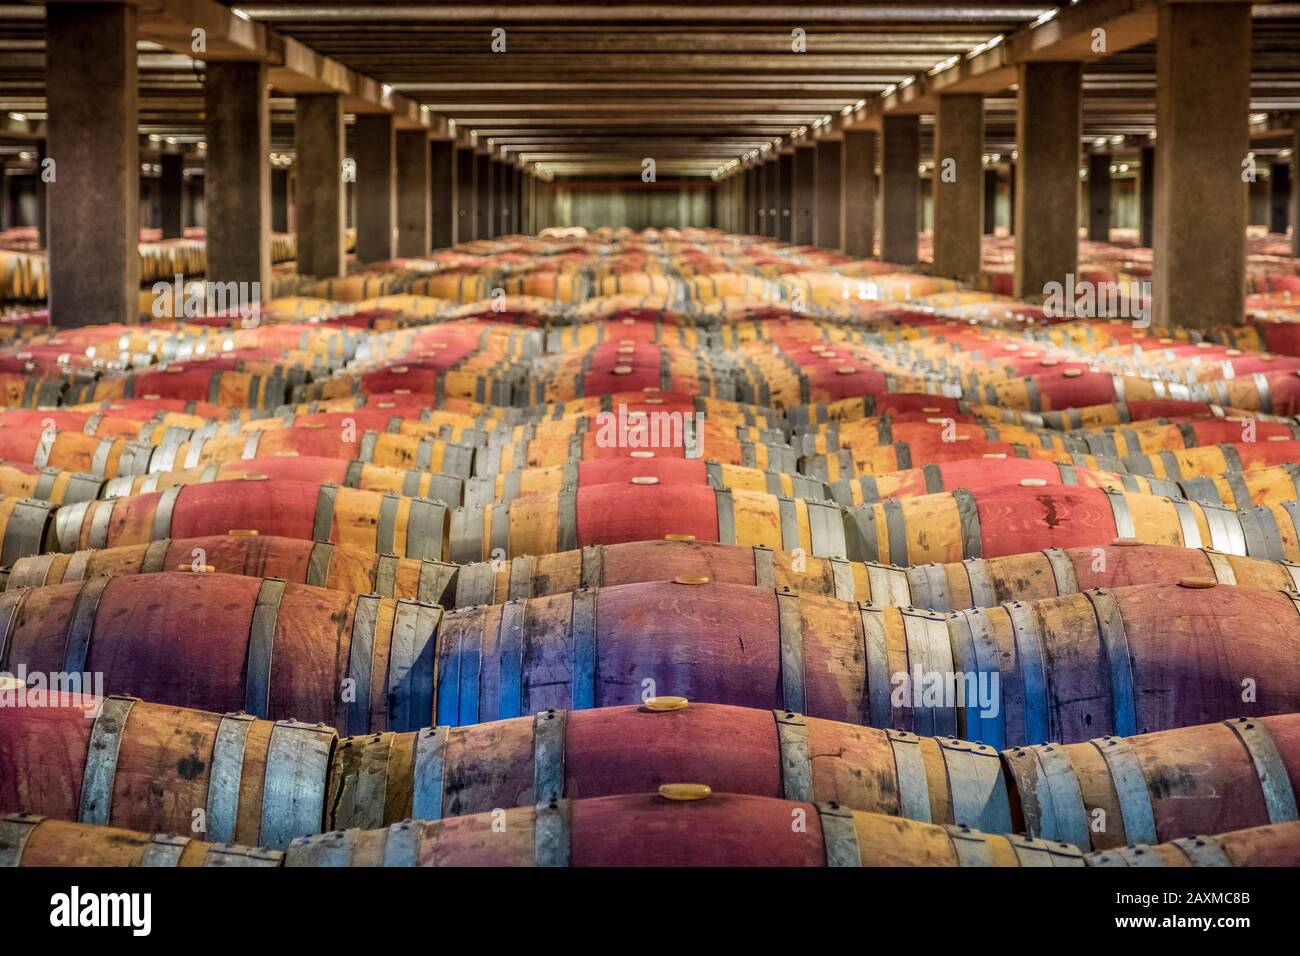 Barrels of wine in the cellar at Campo Viejo winery in Logroño, Spain Stock Photo